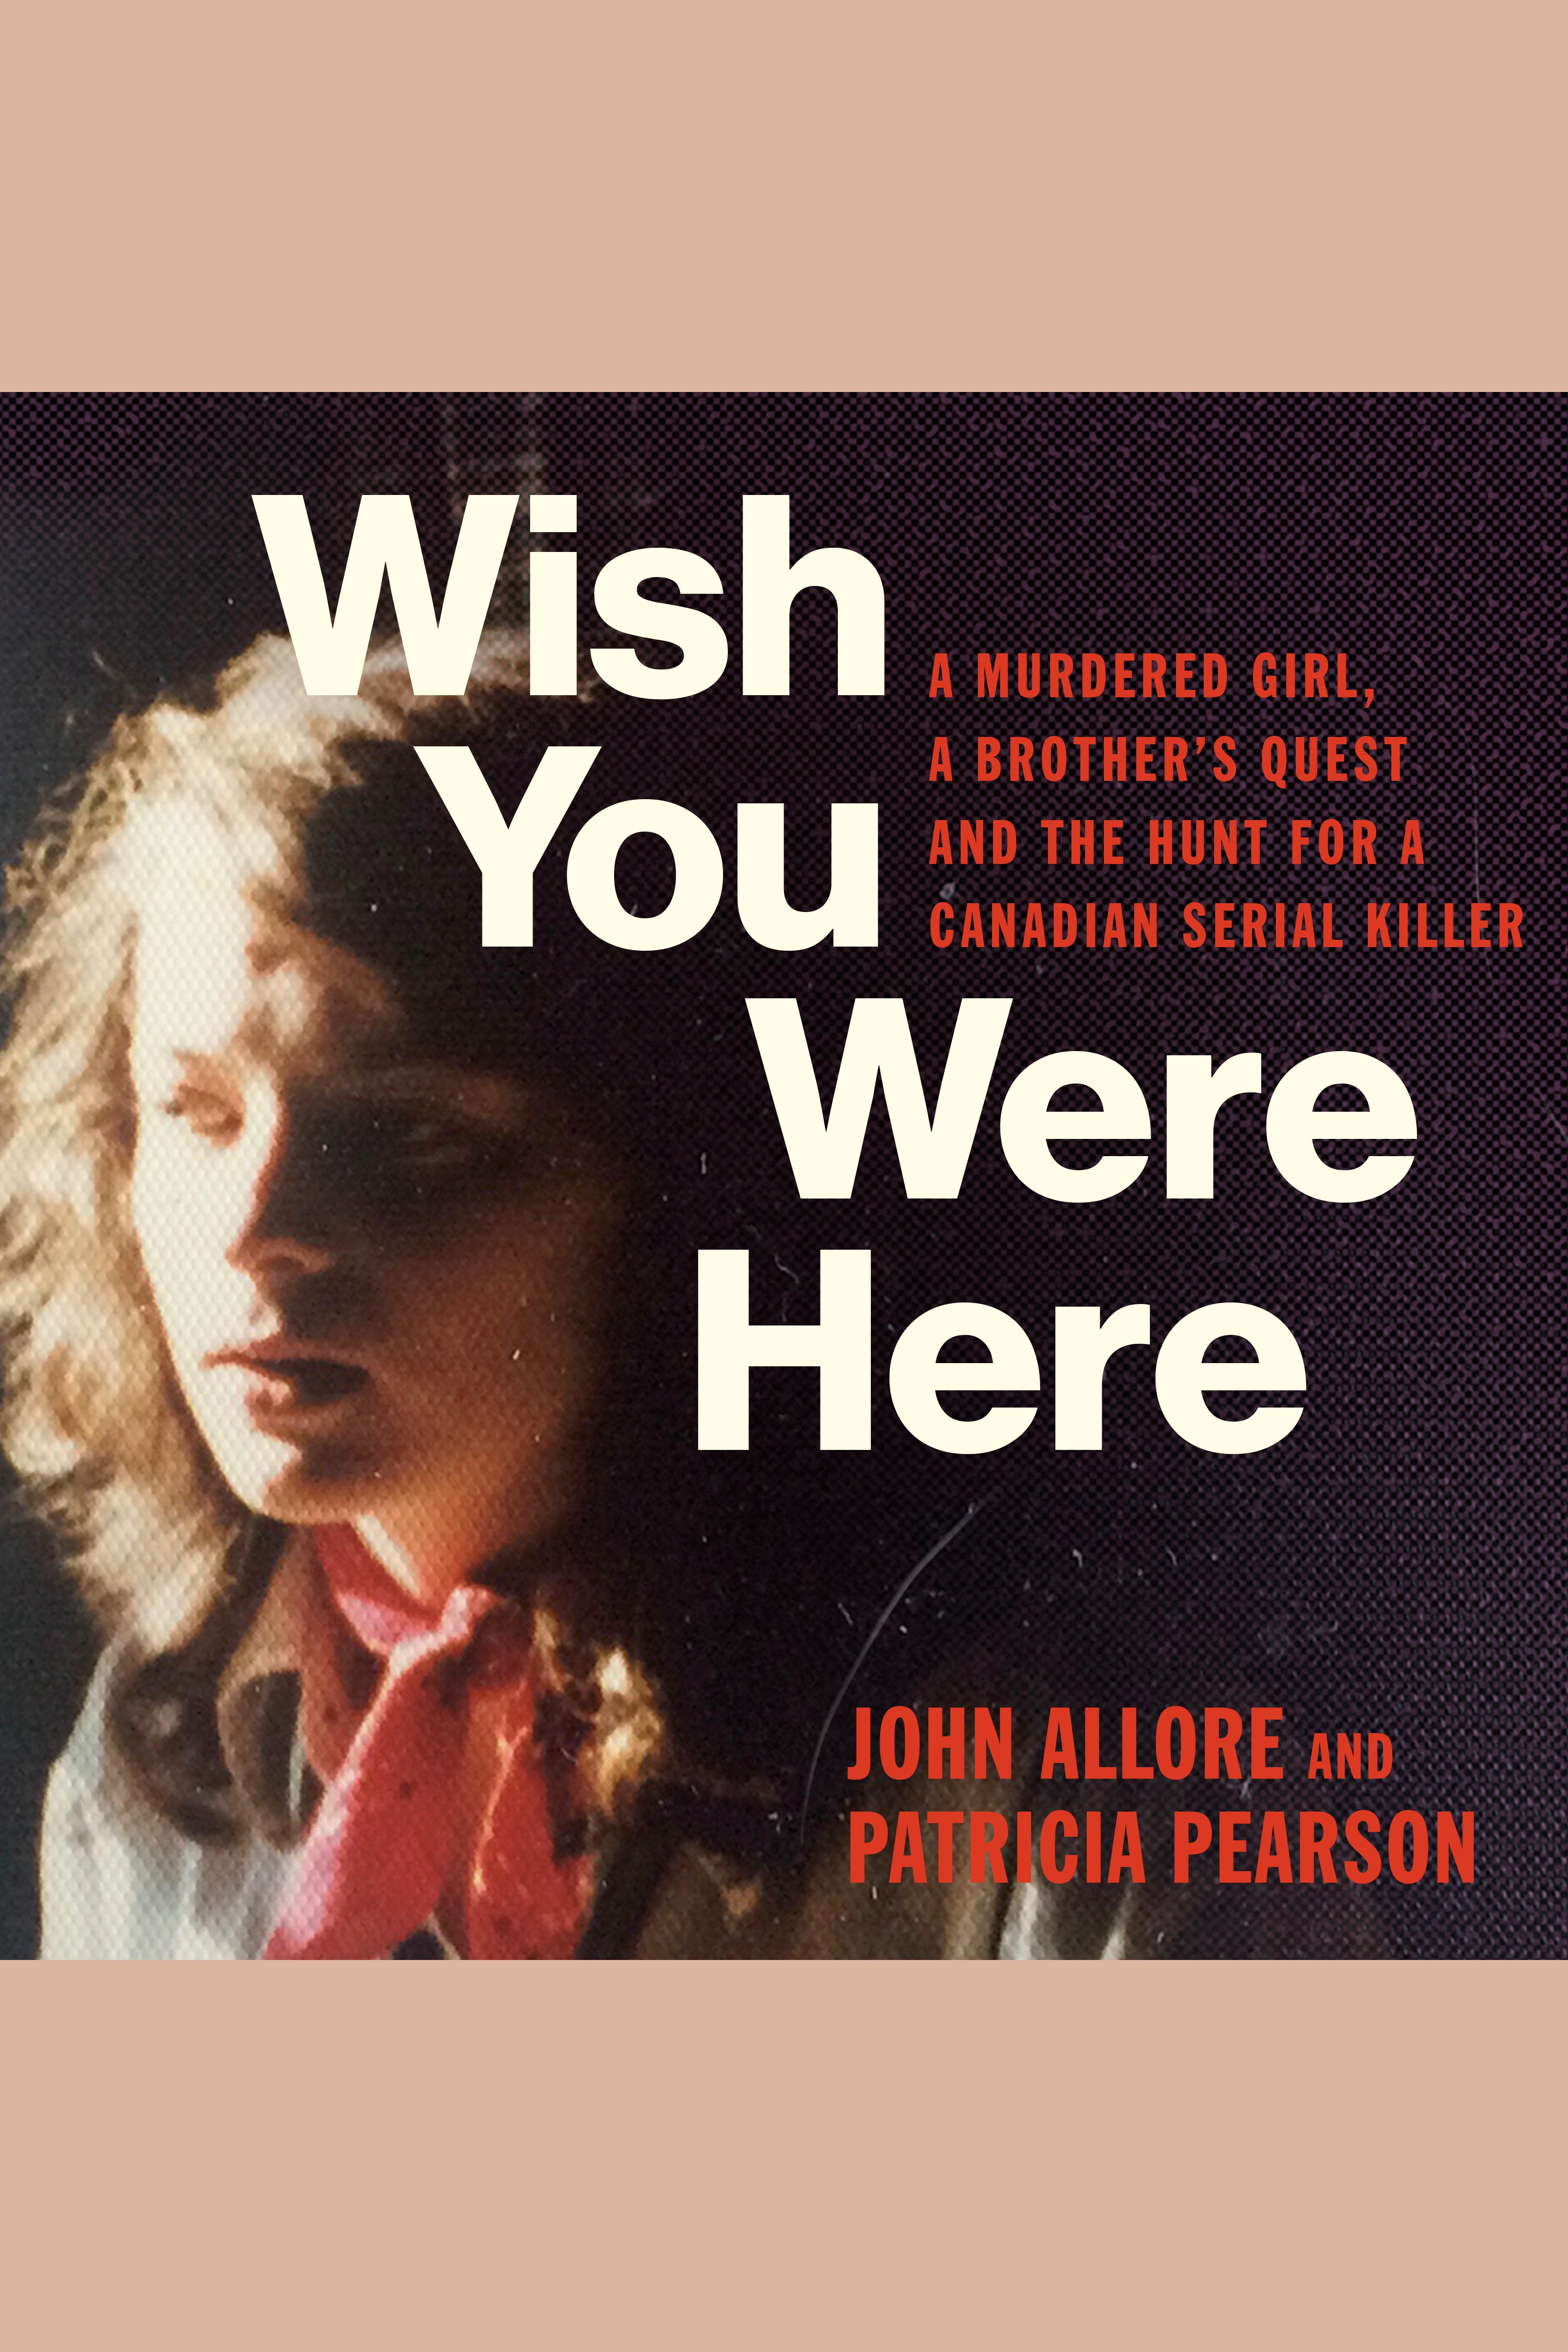 Wish You Were Here A Murdered Girl, a Brother's Quest and the Hunt for a Canadian Serial Killer cover image